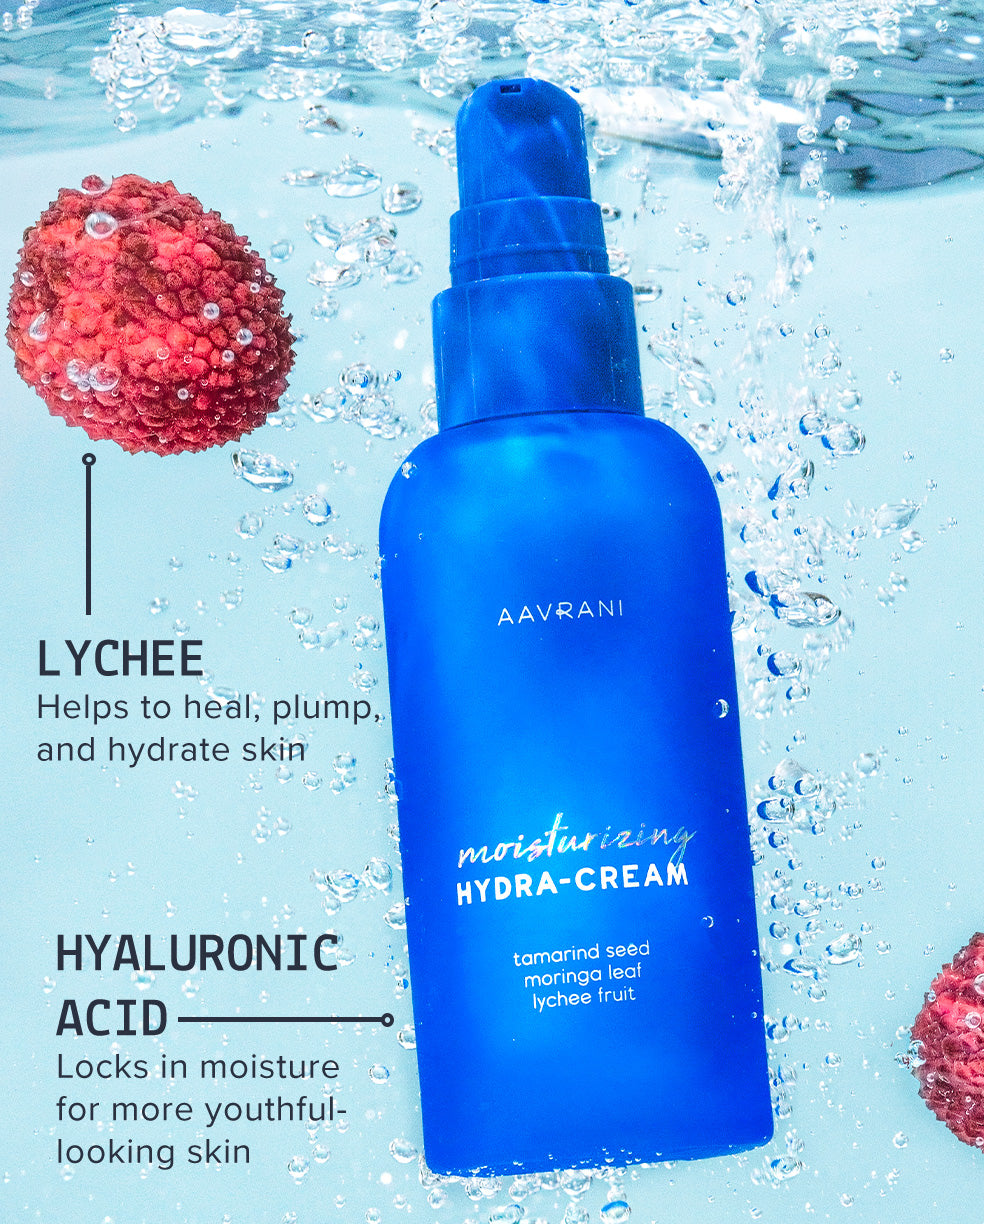 AAVRANI Moisturizing Hydra-Cream, Blue Background with Water Droplets and Ingredients: Lychee and Hyaluronic Acid